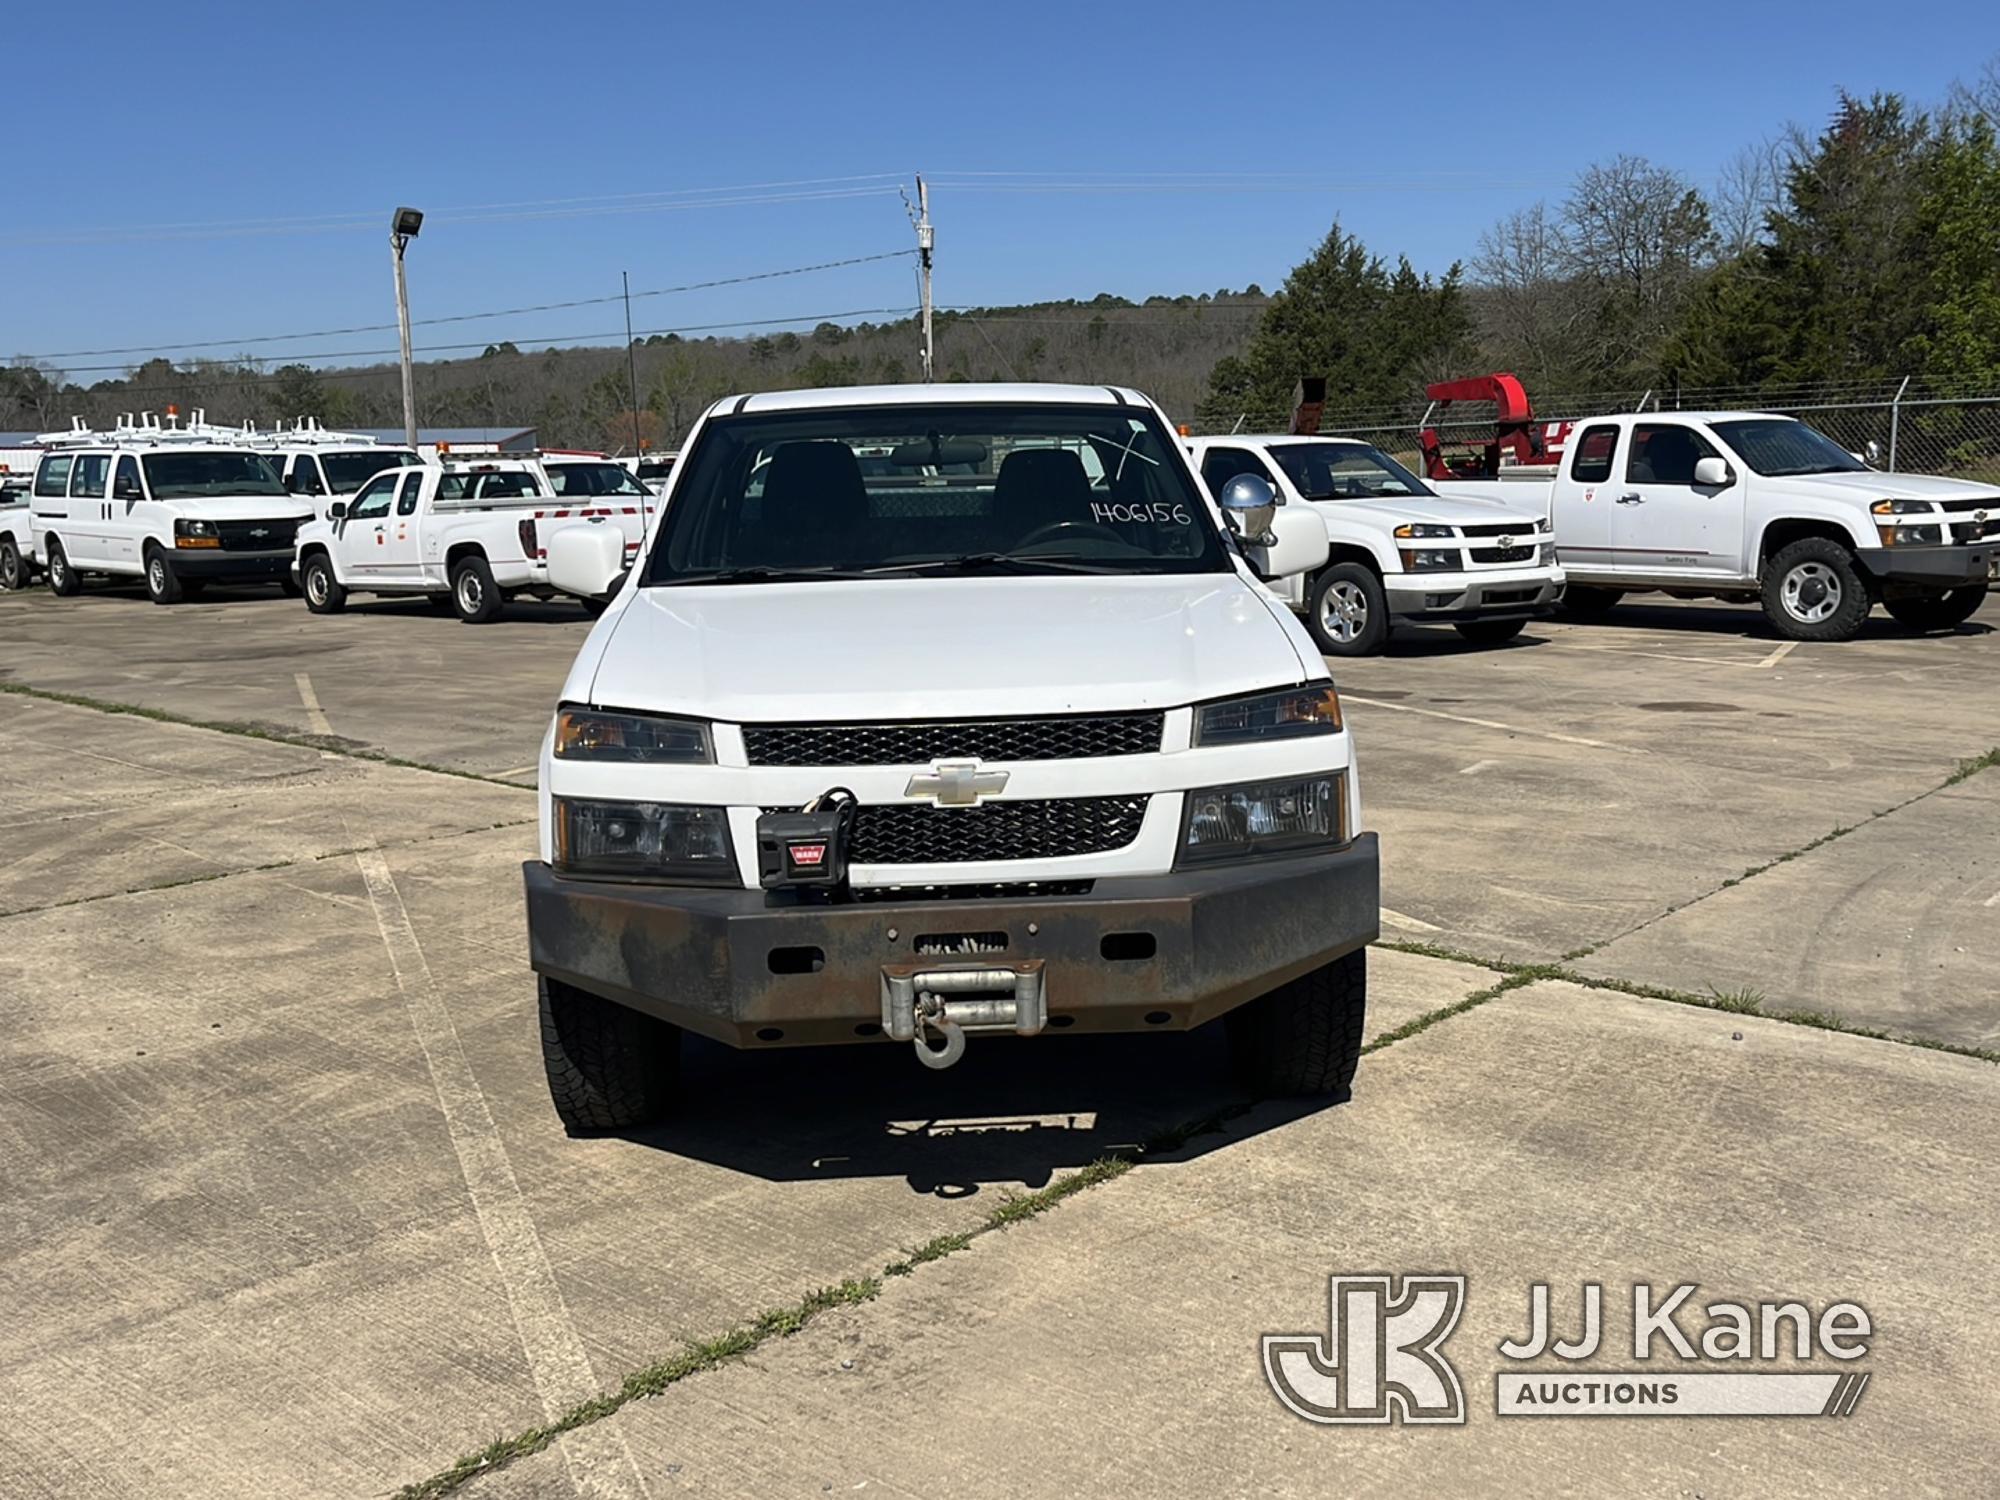 (Conway, AR) 2012 Chevrolet Colorado 4x4 Extended-Cab Pickup Truck Runs & Moves) (Jump To Start,